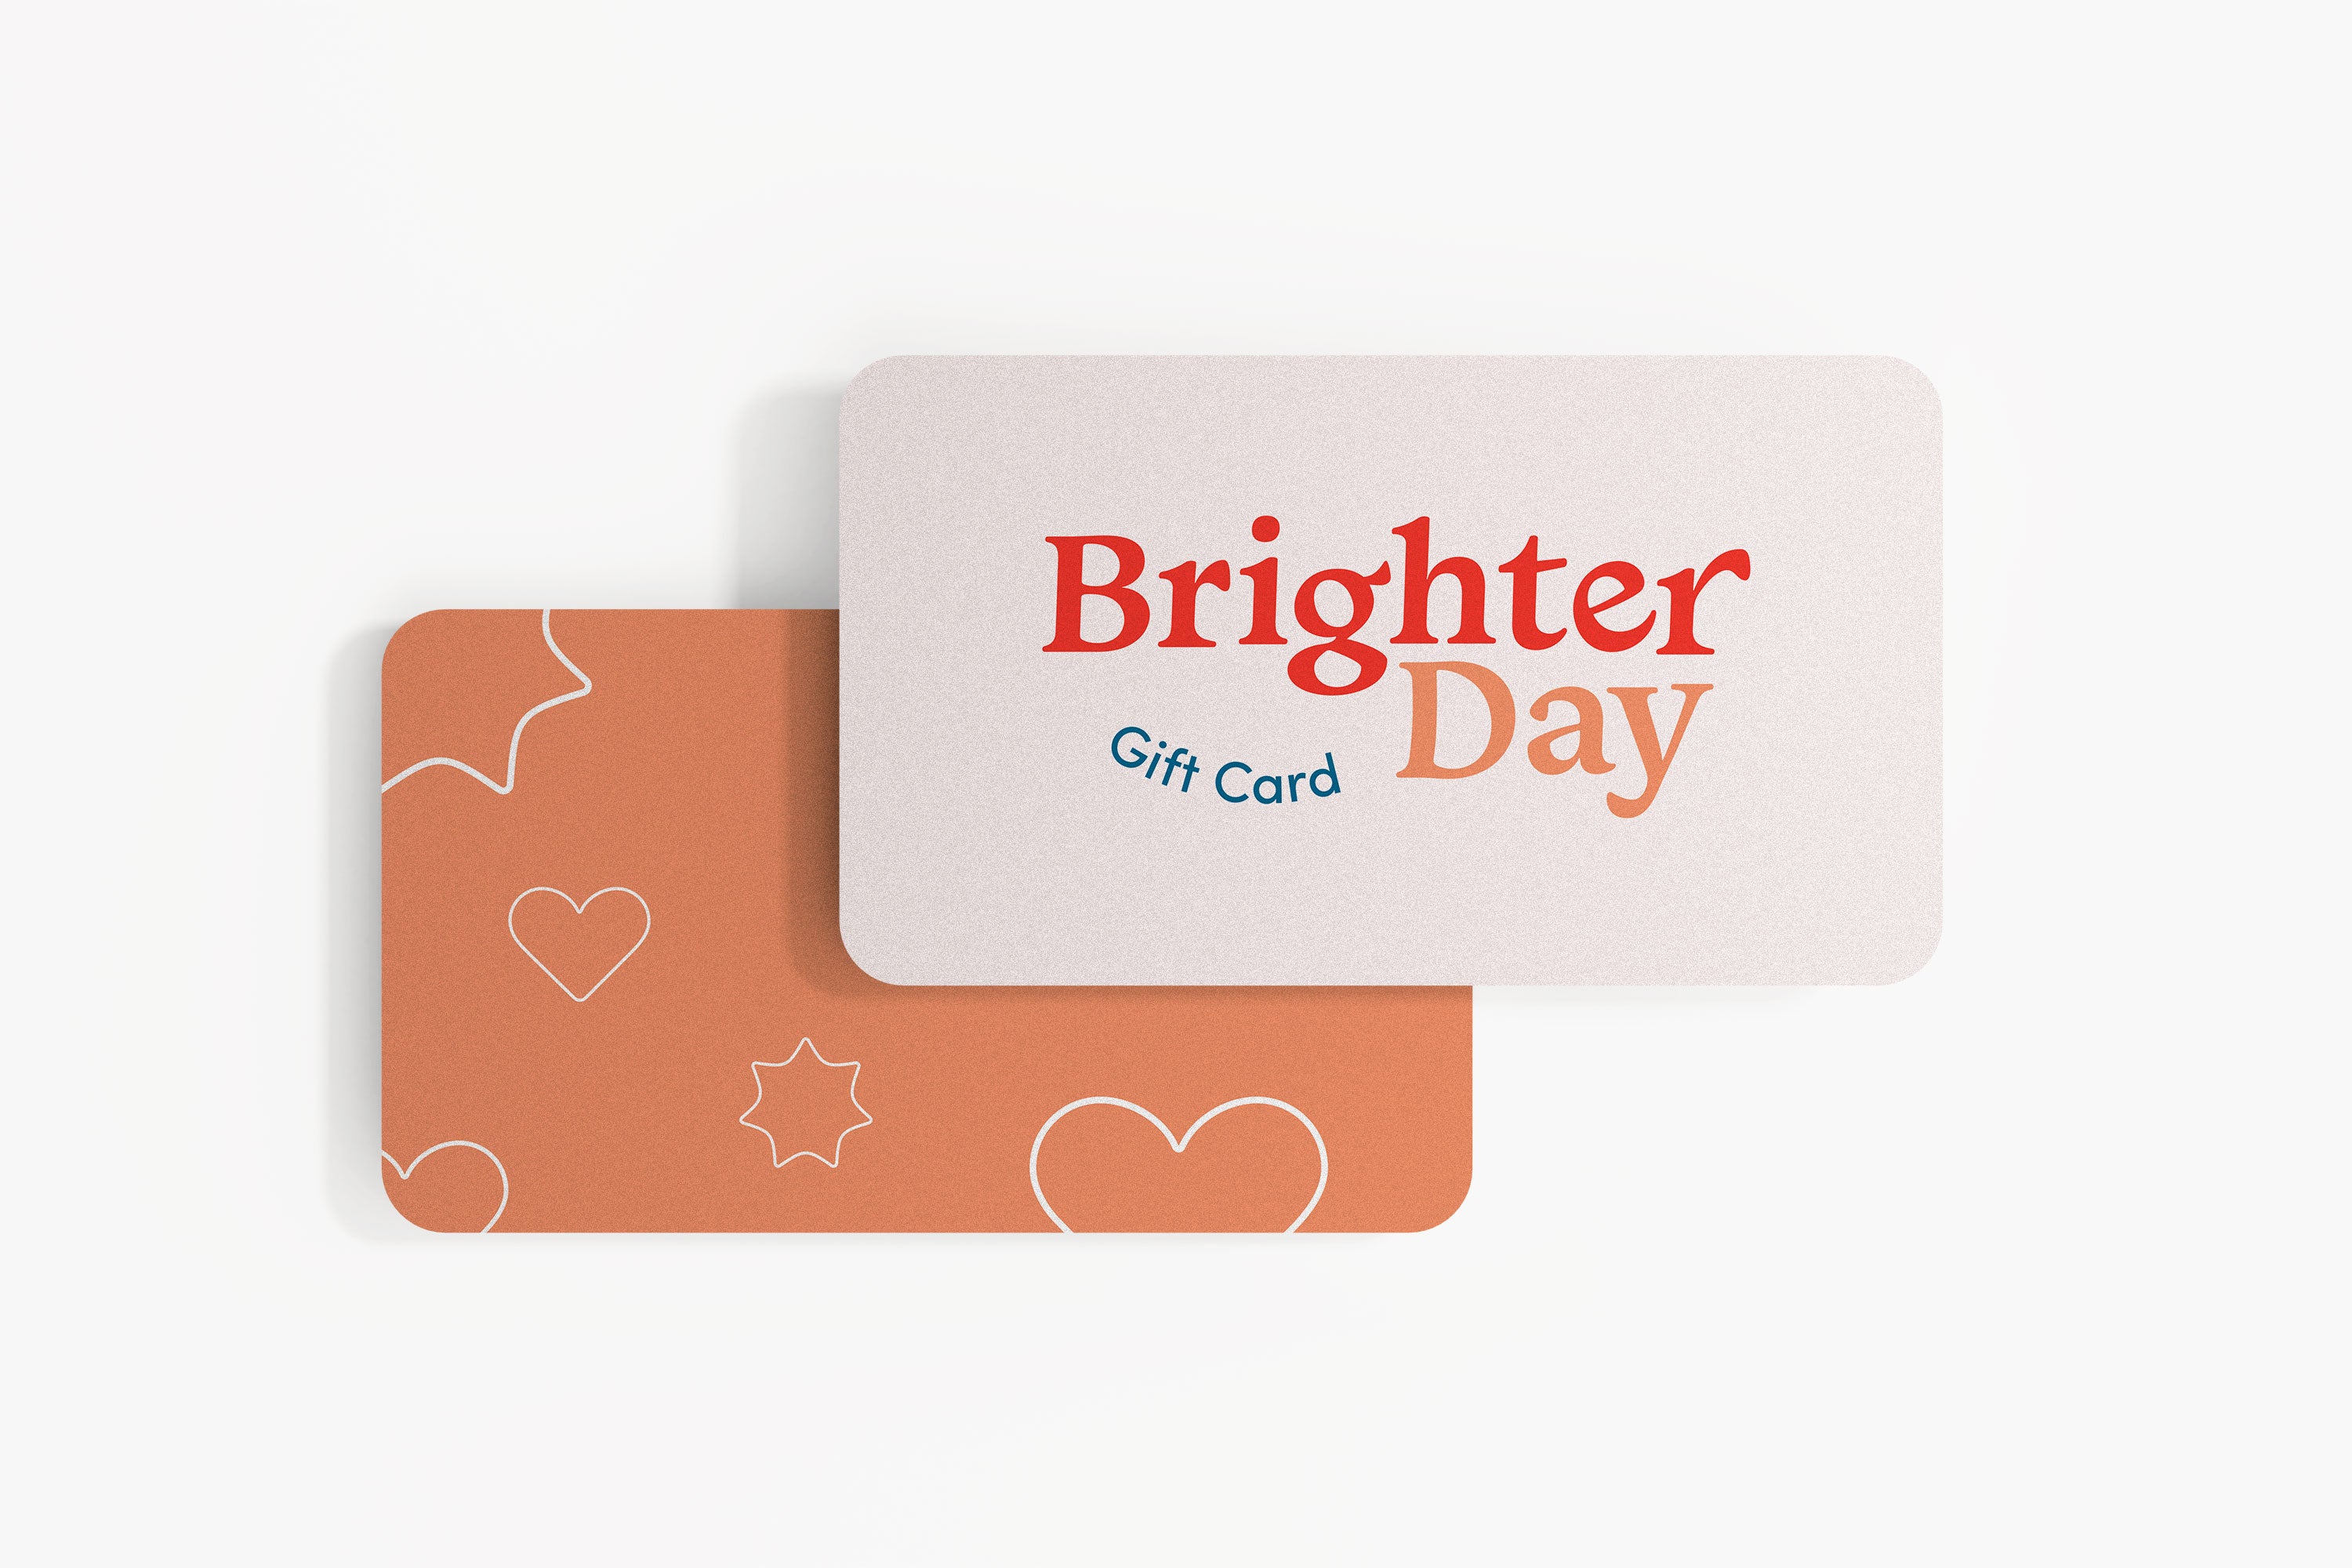 Pink Brighter Day gift card with orange reverse side